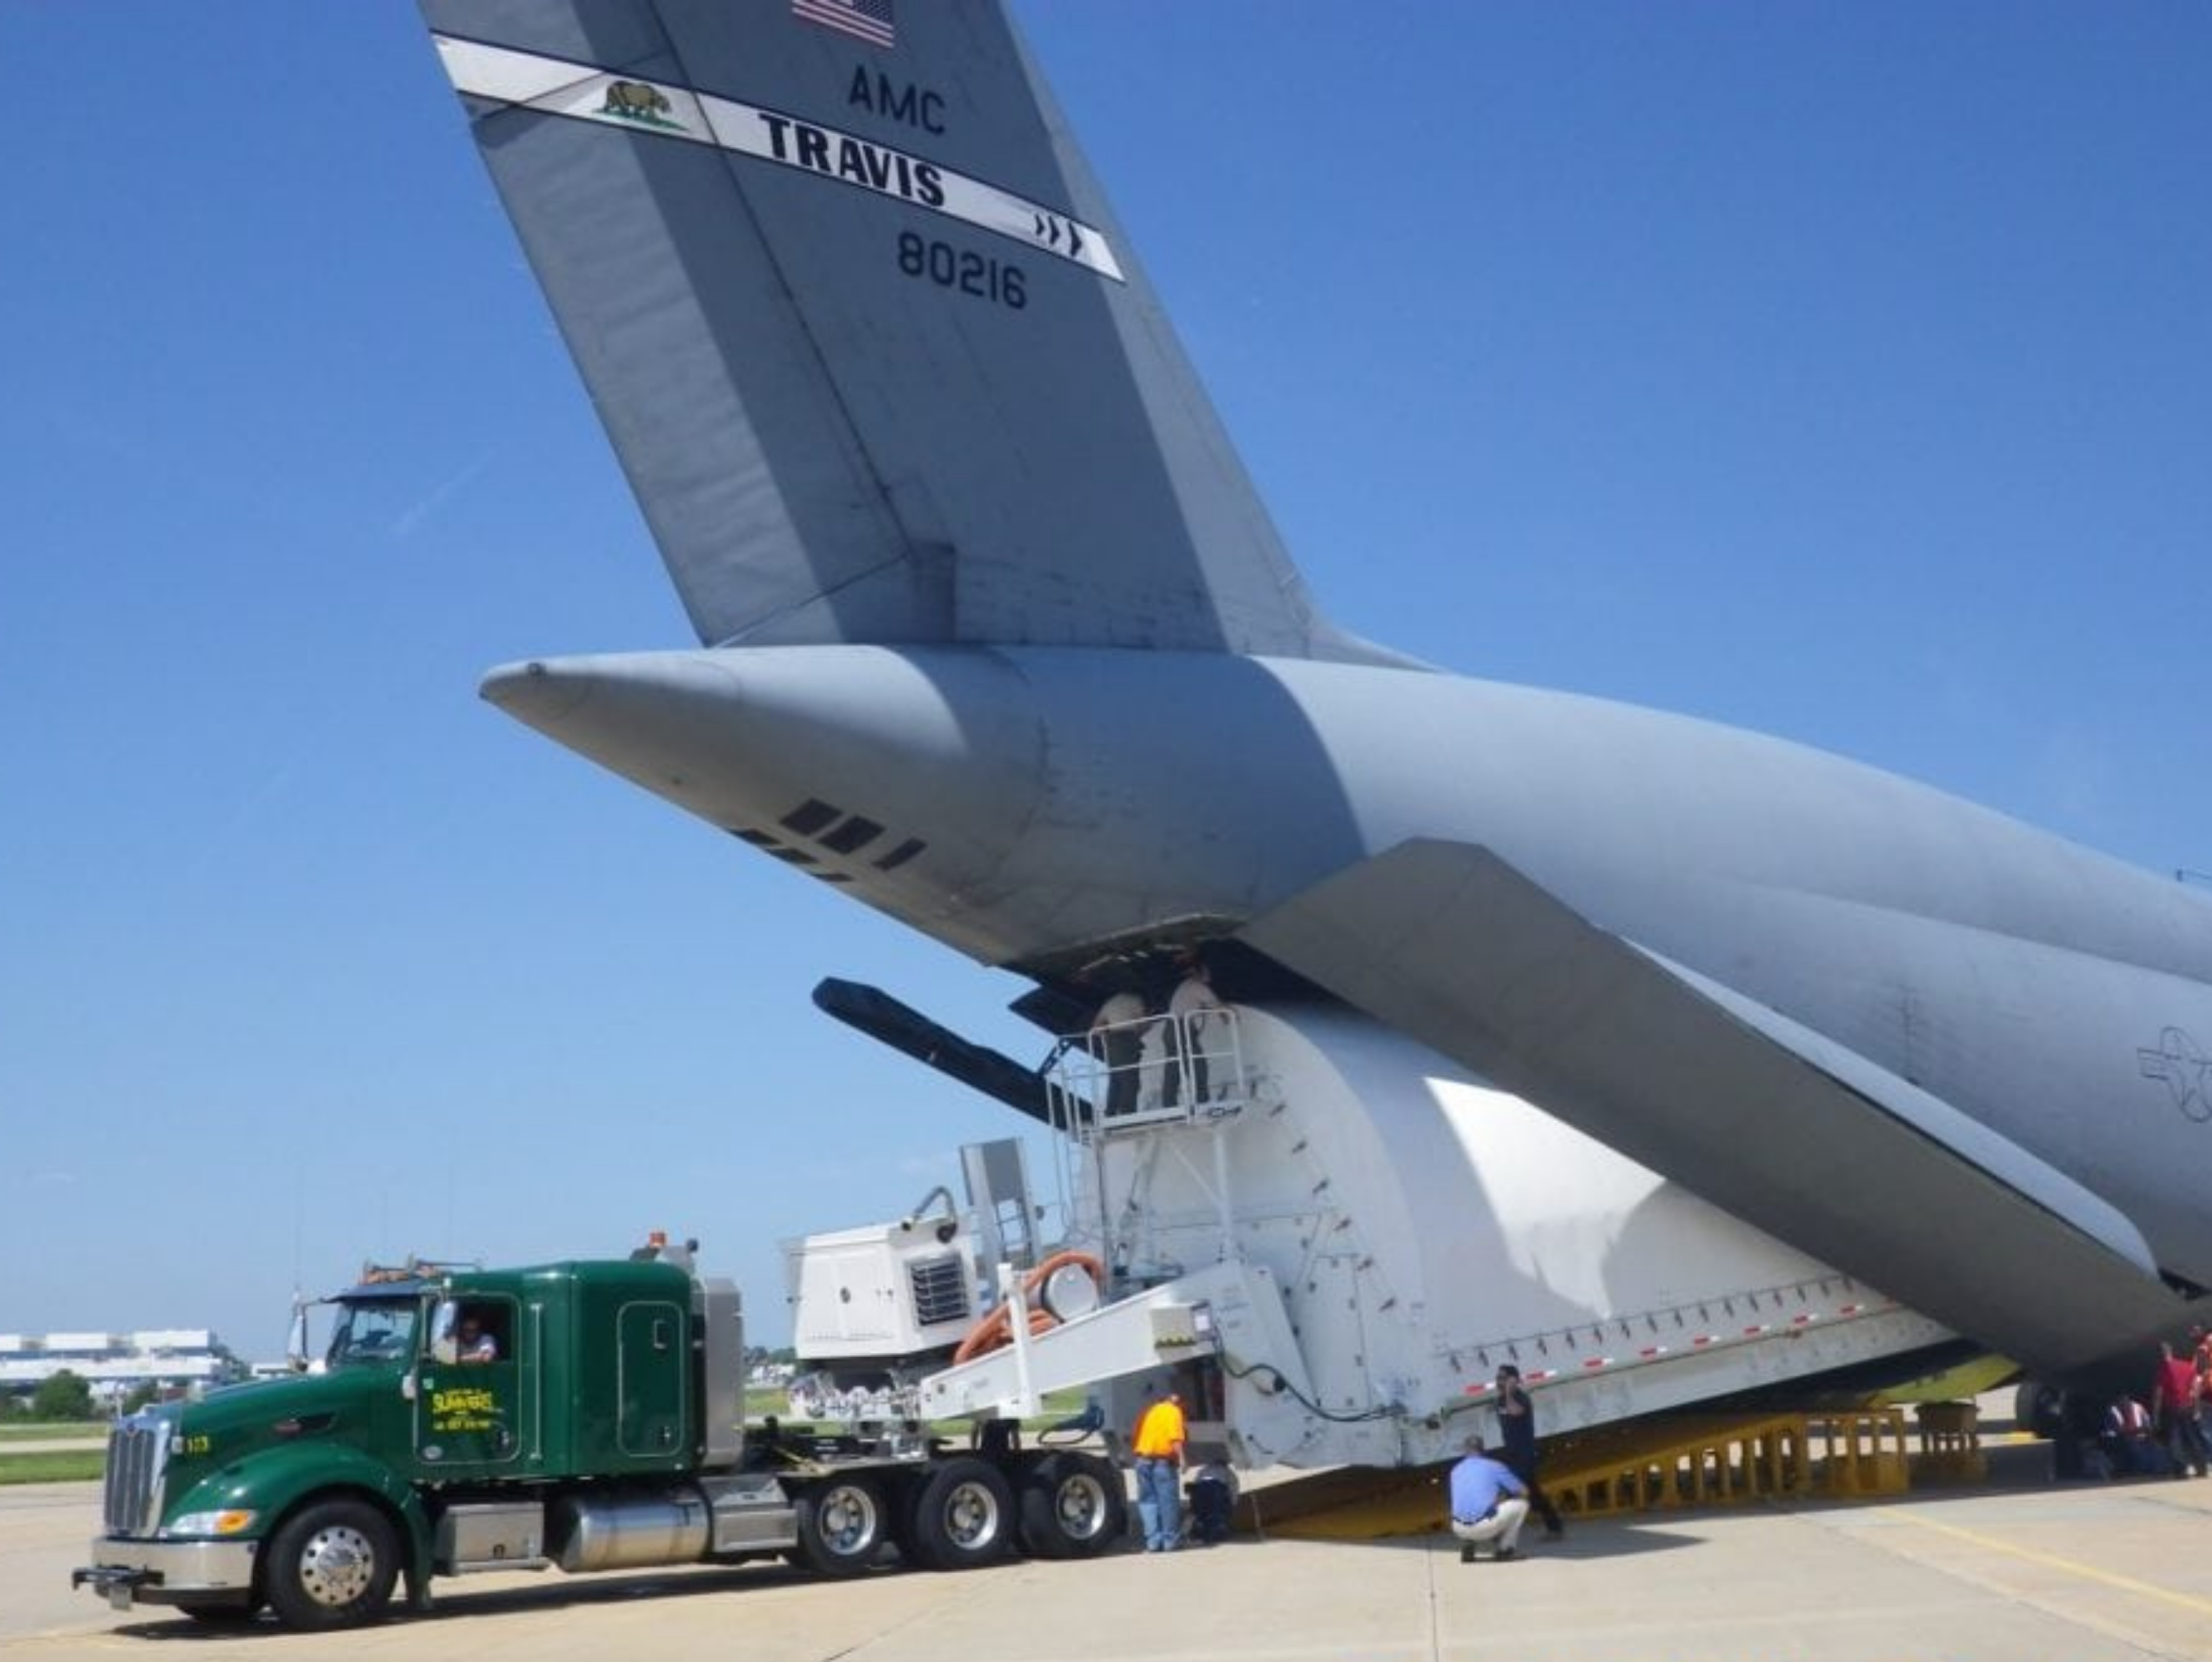 Test loading the transporter for NASA’s James Webb Space Telescope into a USAF C-5C aircraft